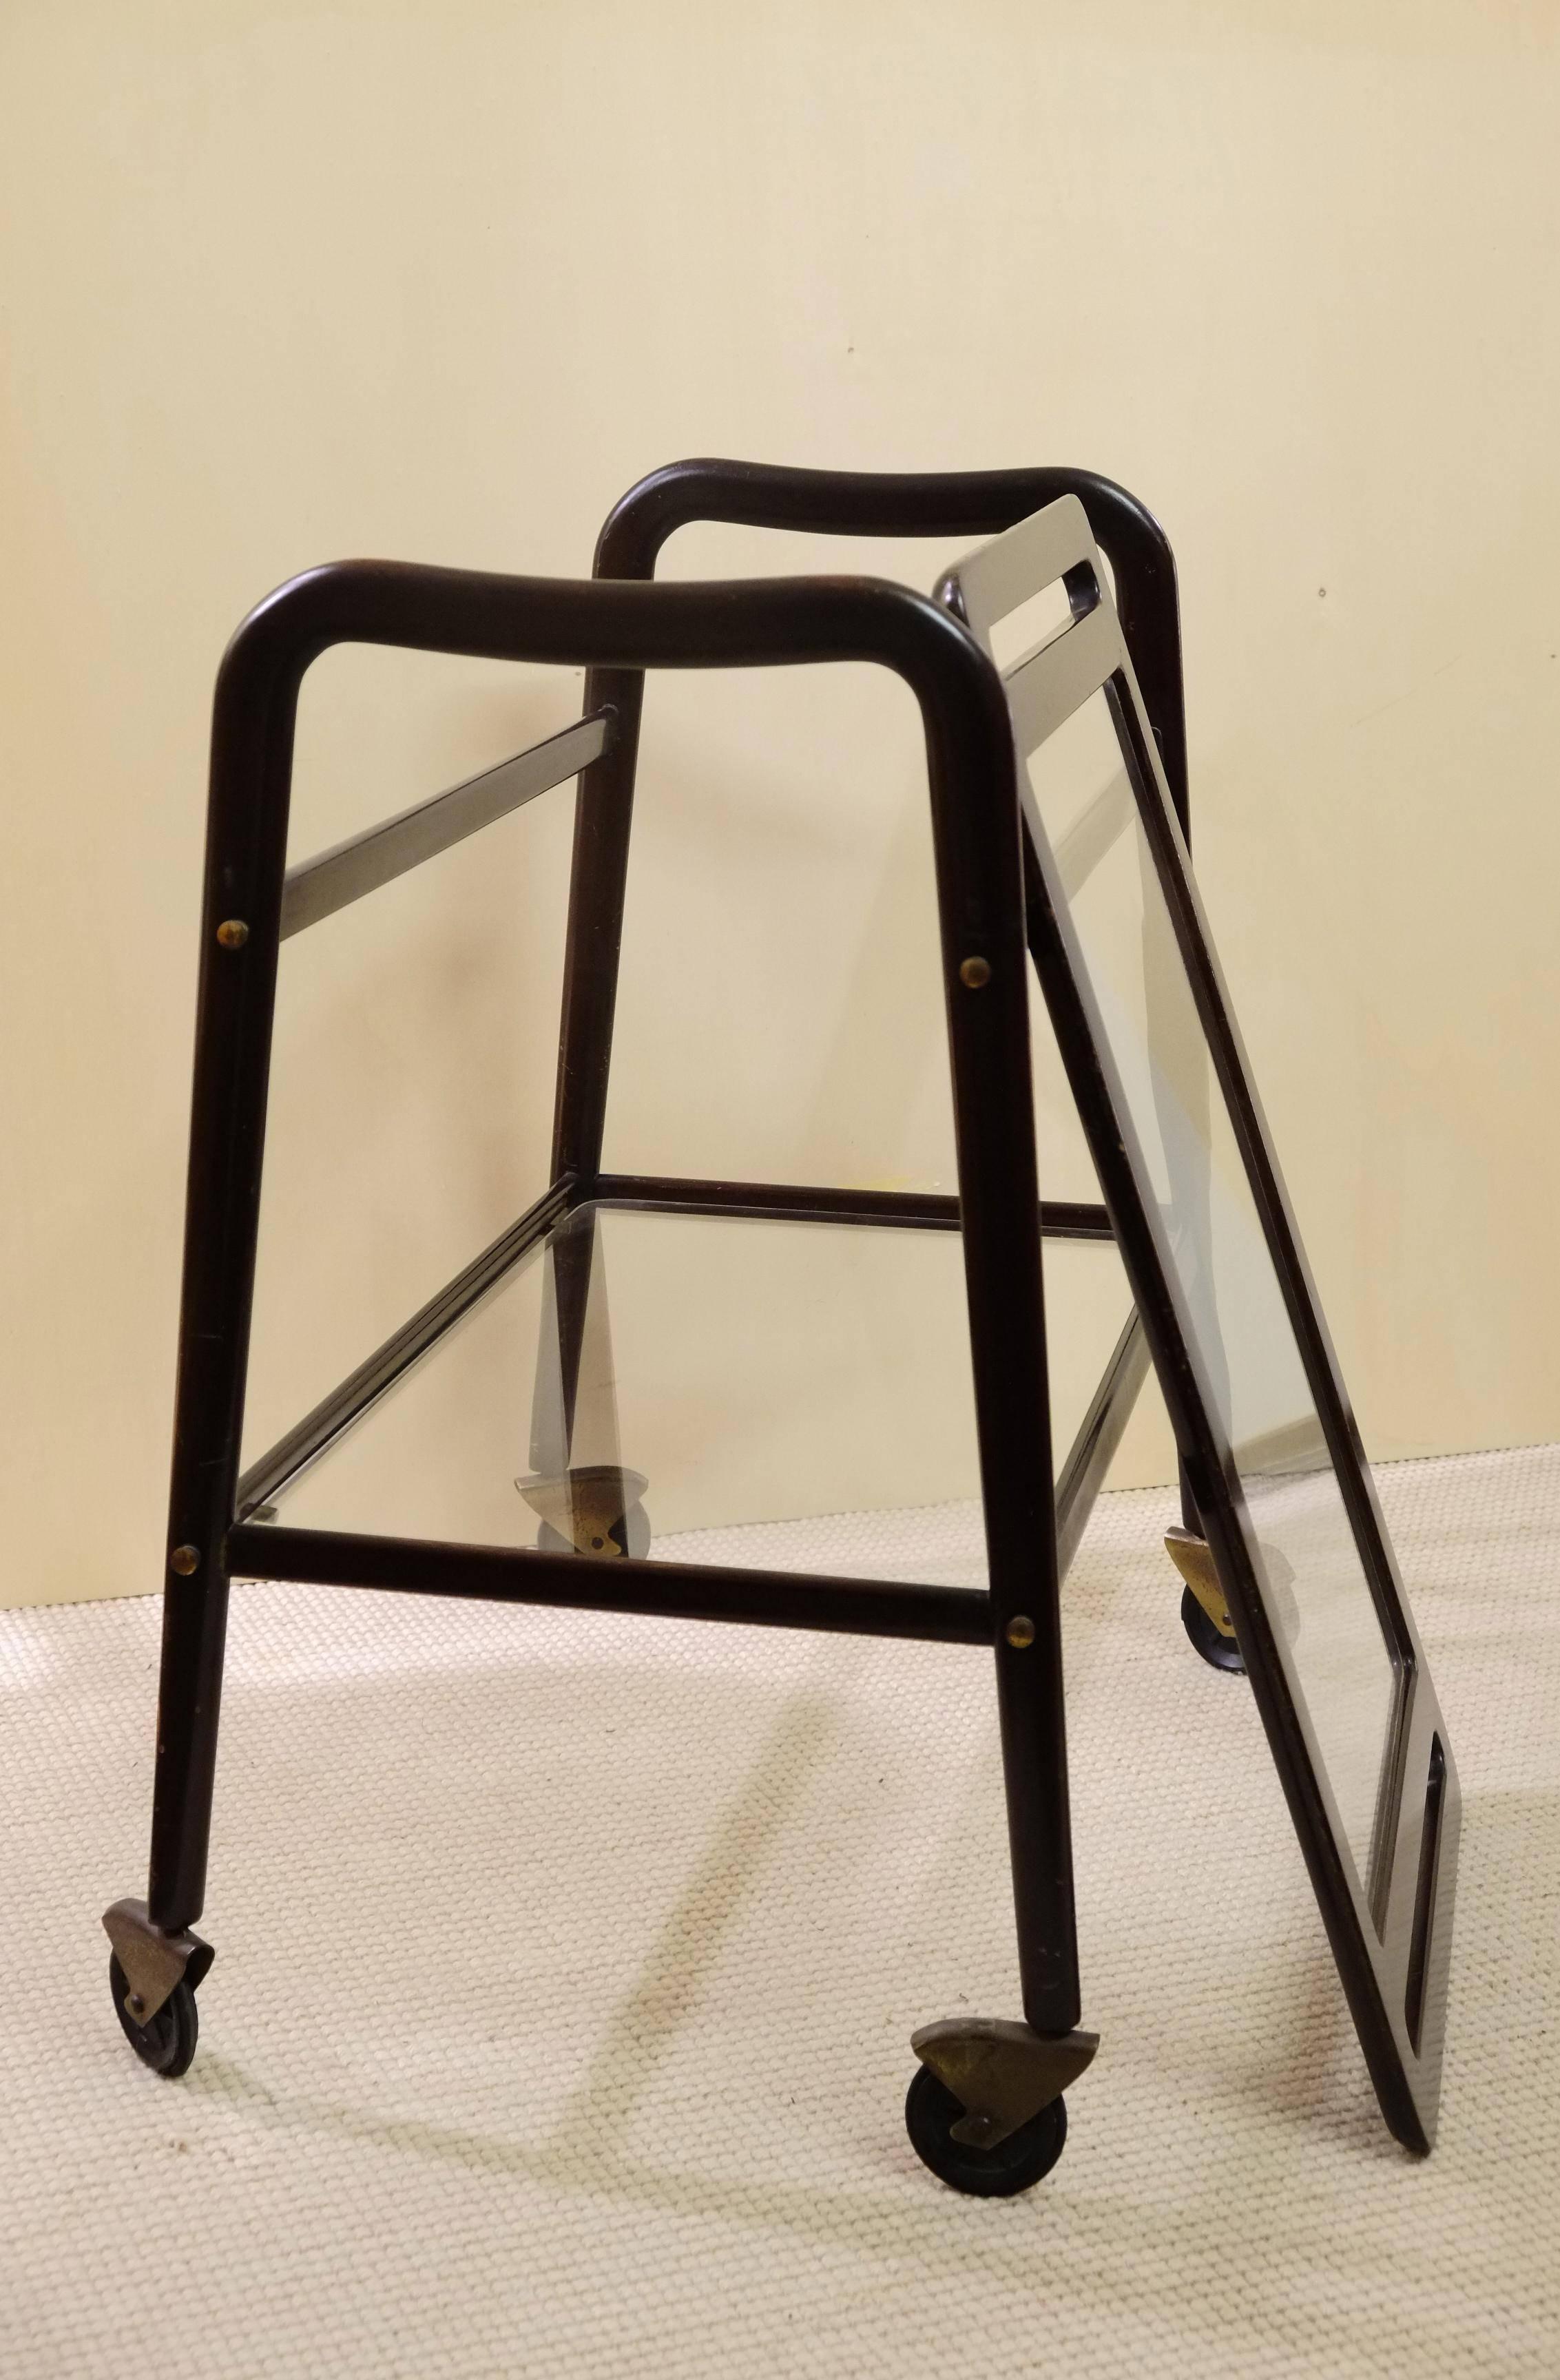 Versatile serving cart designed by Ico Parisi and produced by De Baggis as model no. 60 in 1956. Sculpted black wood frame holds two inset glass shelves. The top shelf lifts off and can be used as a tray. Frame is on casters.